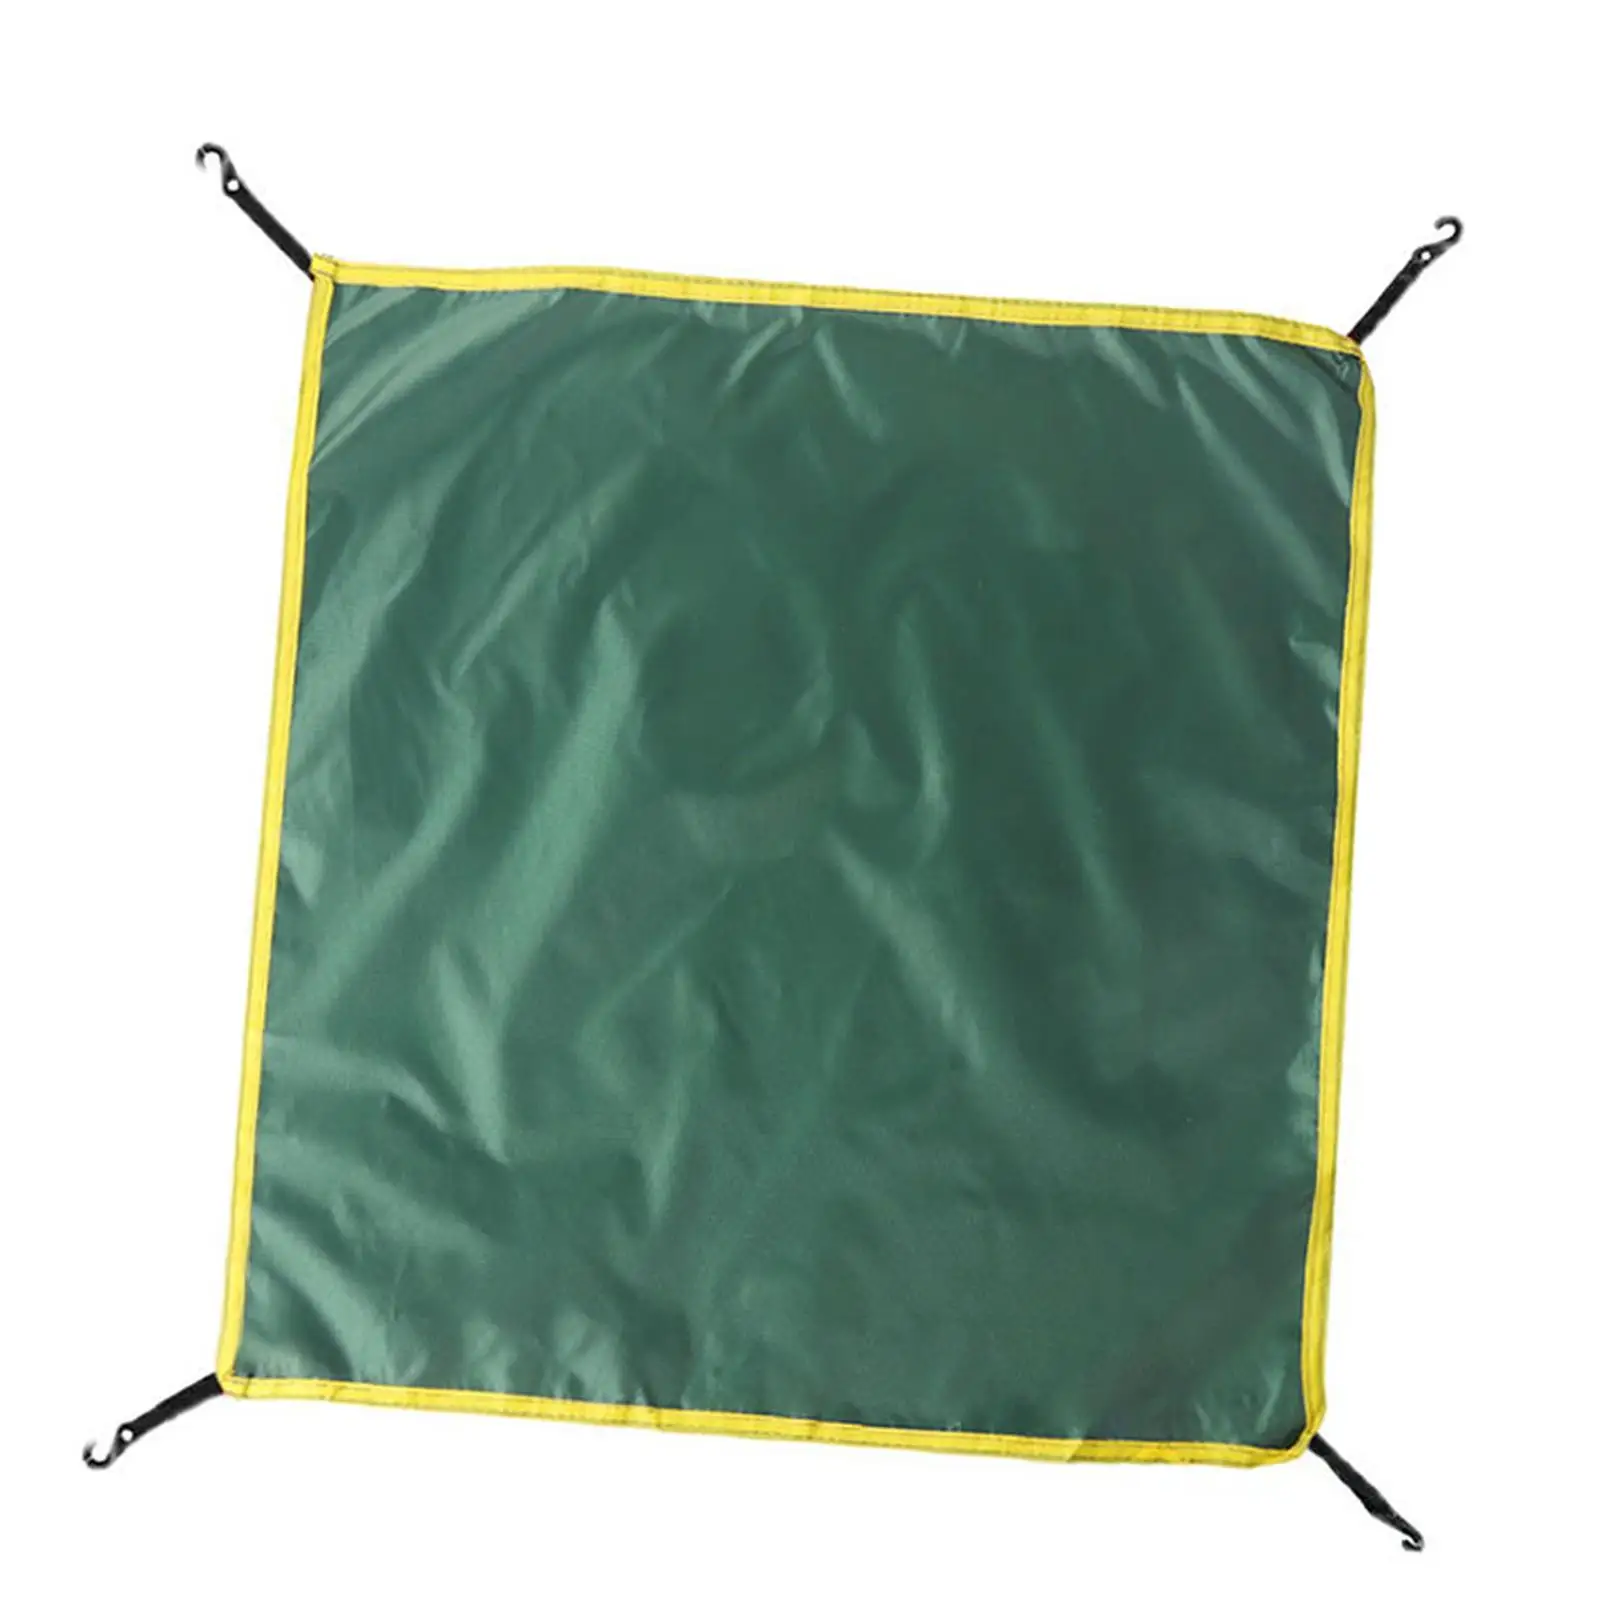 Rainfly Portable Tarp Lightweight Fits 3-4 Person Automatic Tent Waterproof Sunscreen Rain Fly Tent Top Cover for Hiking Camping